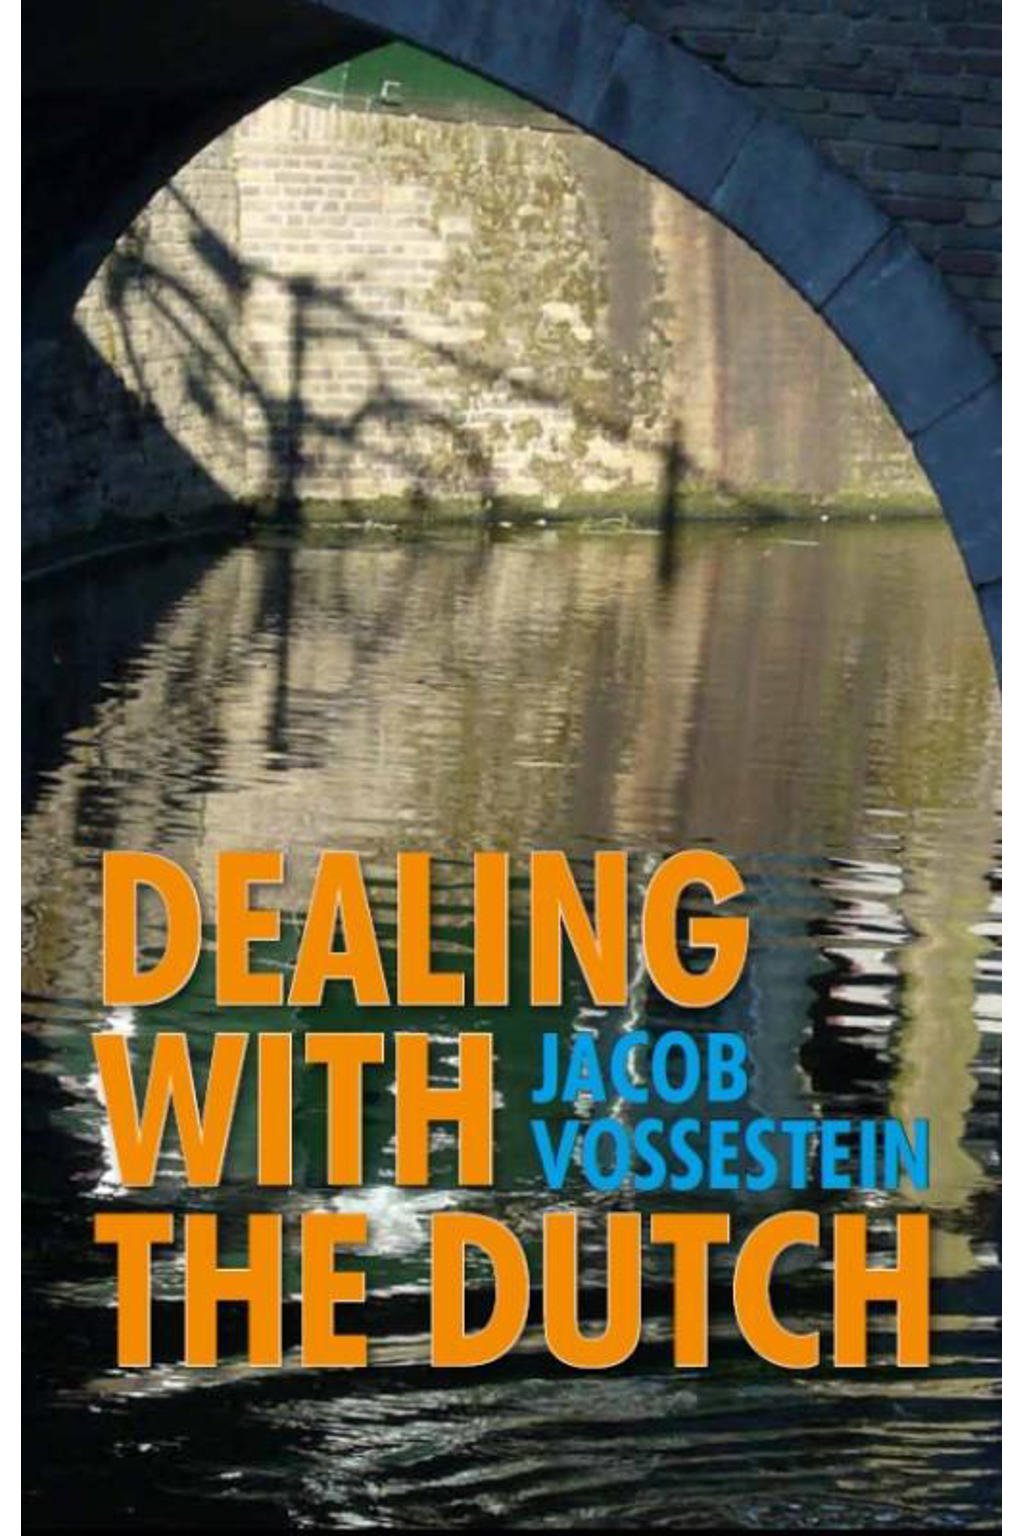 Dealing with the Dutch - J. Vossestein